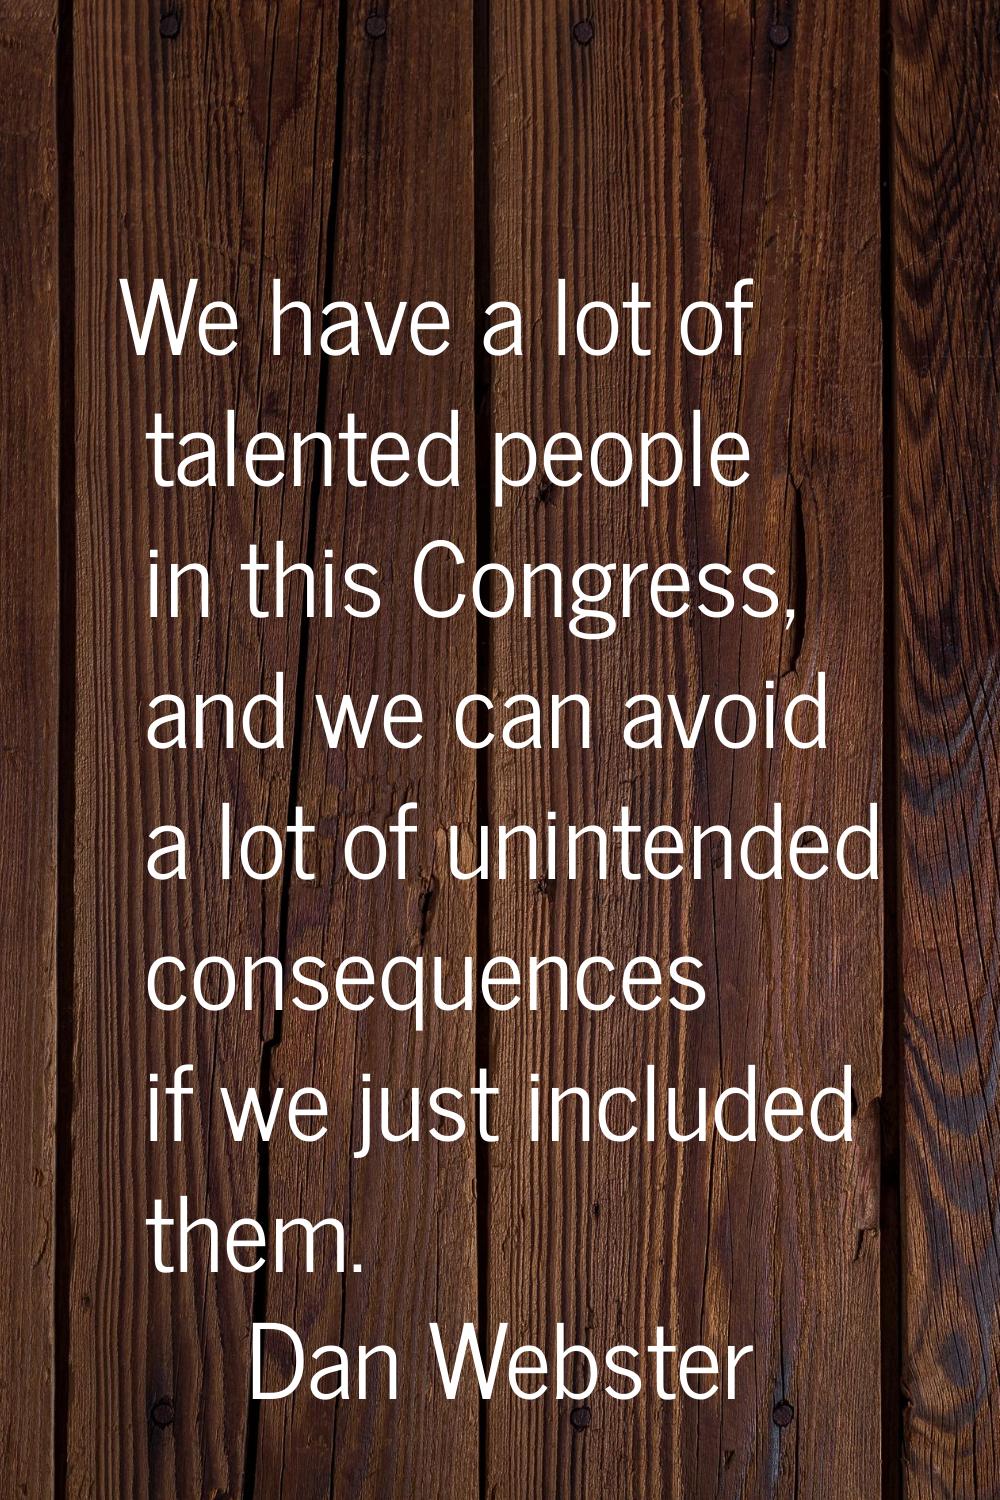 We have a lot of talented people in this Congress, and we can avoid a lot of unintended consequence